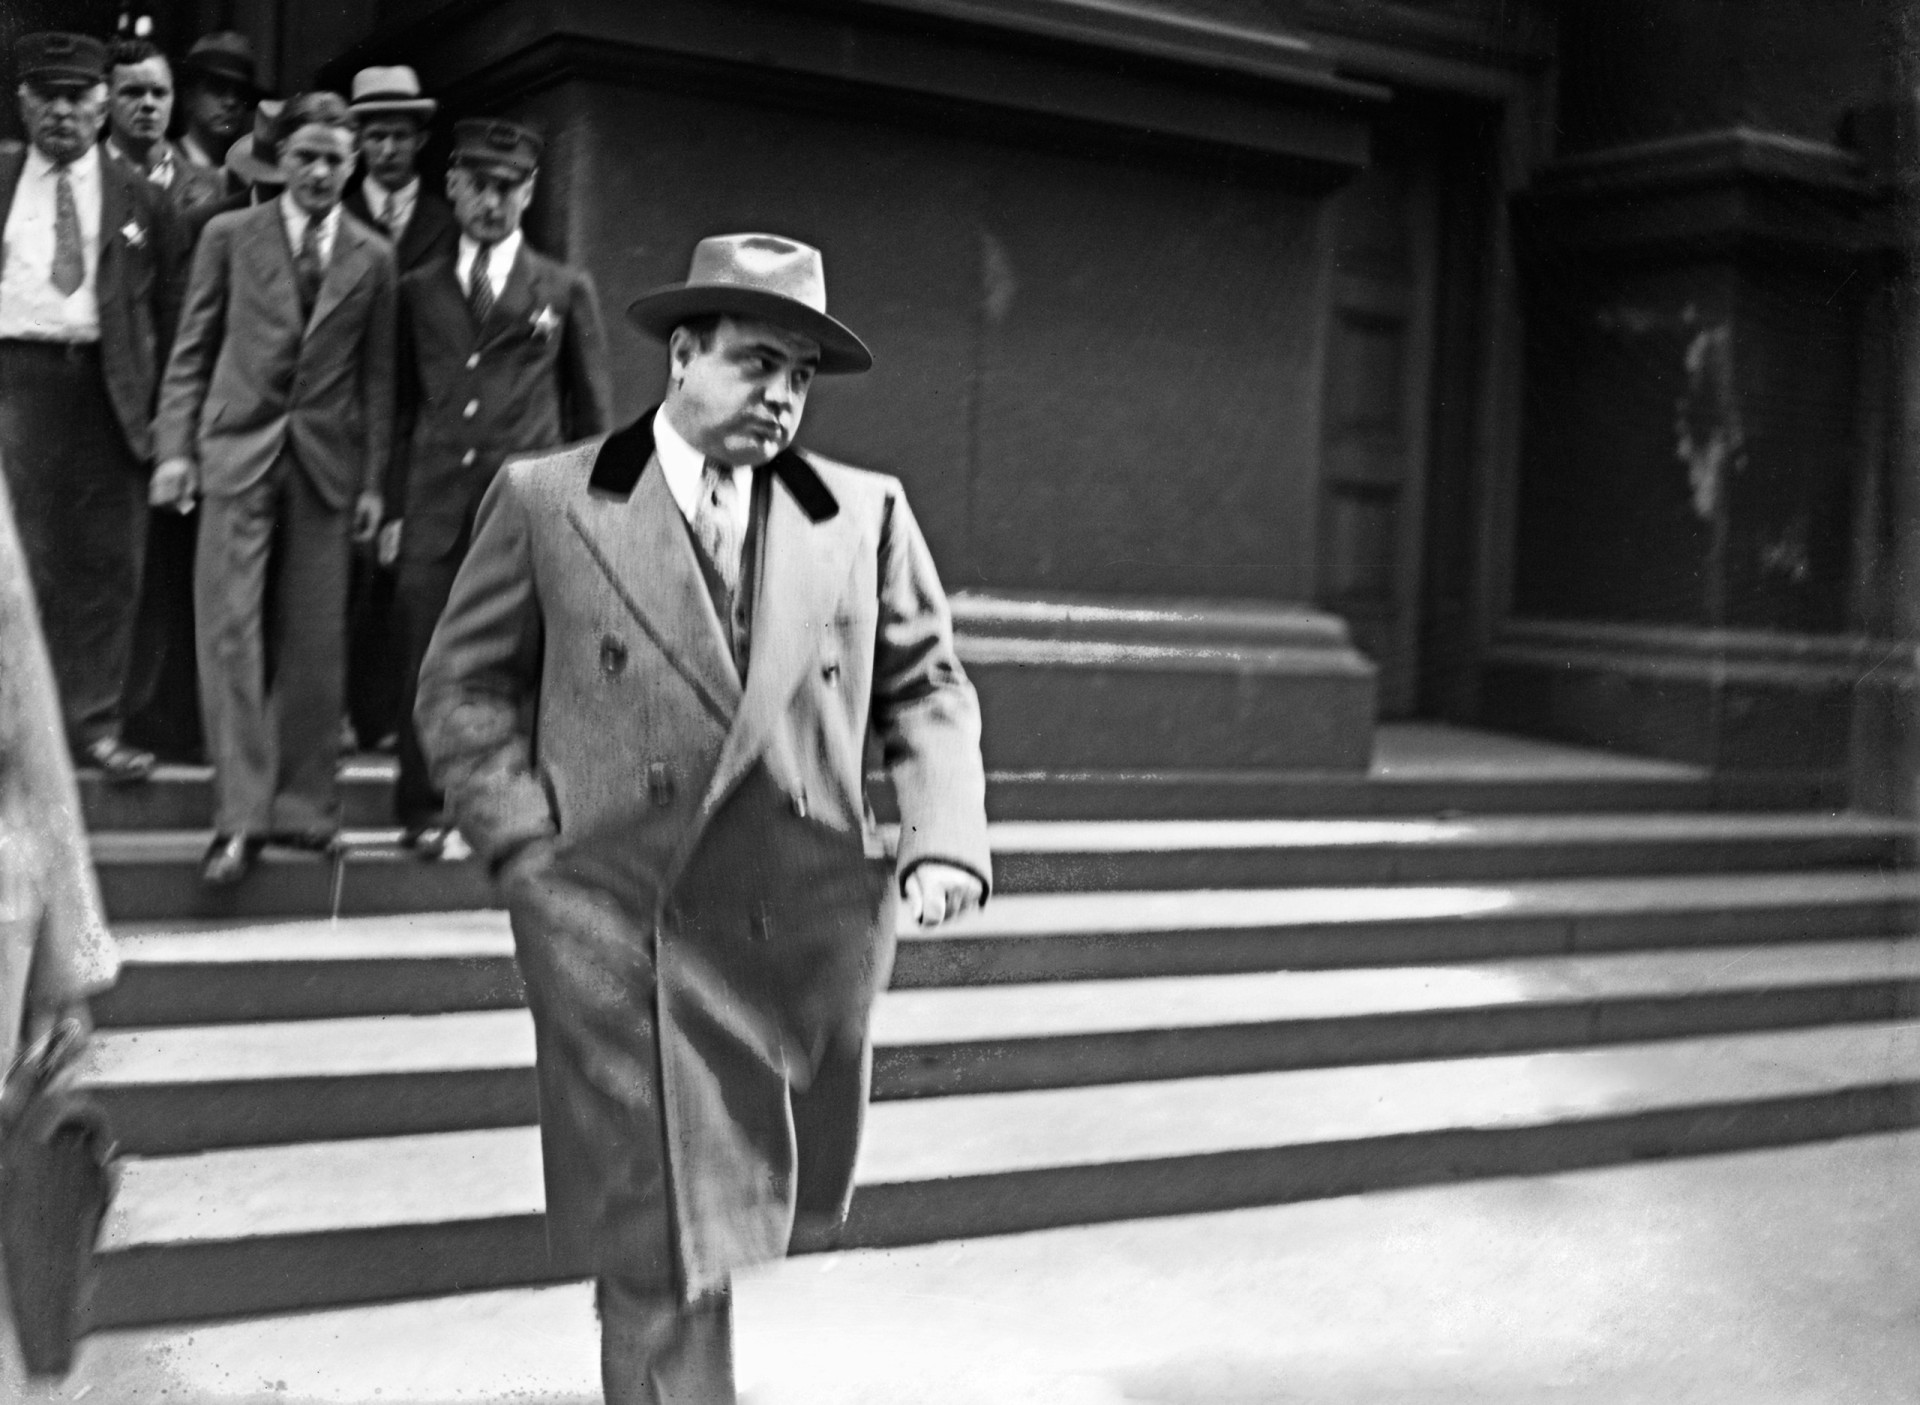 <p>Al Capone attained notoriety during the <a href="https://www.starsinsider.com/lifestyle/417808/prohibition-and-when-america-went-dry" rel="noopener">Prohibition</a> era in the United States as the boss of the feared Chicago Outfit, an organized crime syndicate that involved itself with bootlegging, brothels, and murder. Capone was its charismatic head, a ruthless and ambitious individual whose propensity for violence was matched only by his greed for power and money. He was born over 100 years ago, on January 17, 1899. But his name remains synonymous with the gangster culture of the 1920s and '30s. </p> <p>Click through this gallery and read more about the notorious life and death of Al Capone.</p><p>You may also like:<a href="https://www.starsinsider.com/n/61715?utm_source=msn.com&utm_medium=display&utm_campaign=referral_description&utm_content=455538v8en-us"> The most terrifying places in the world </a></p>